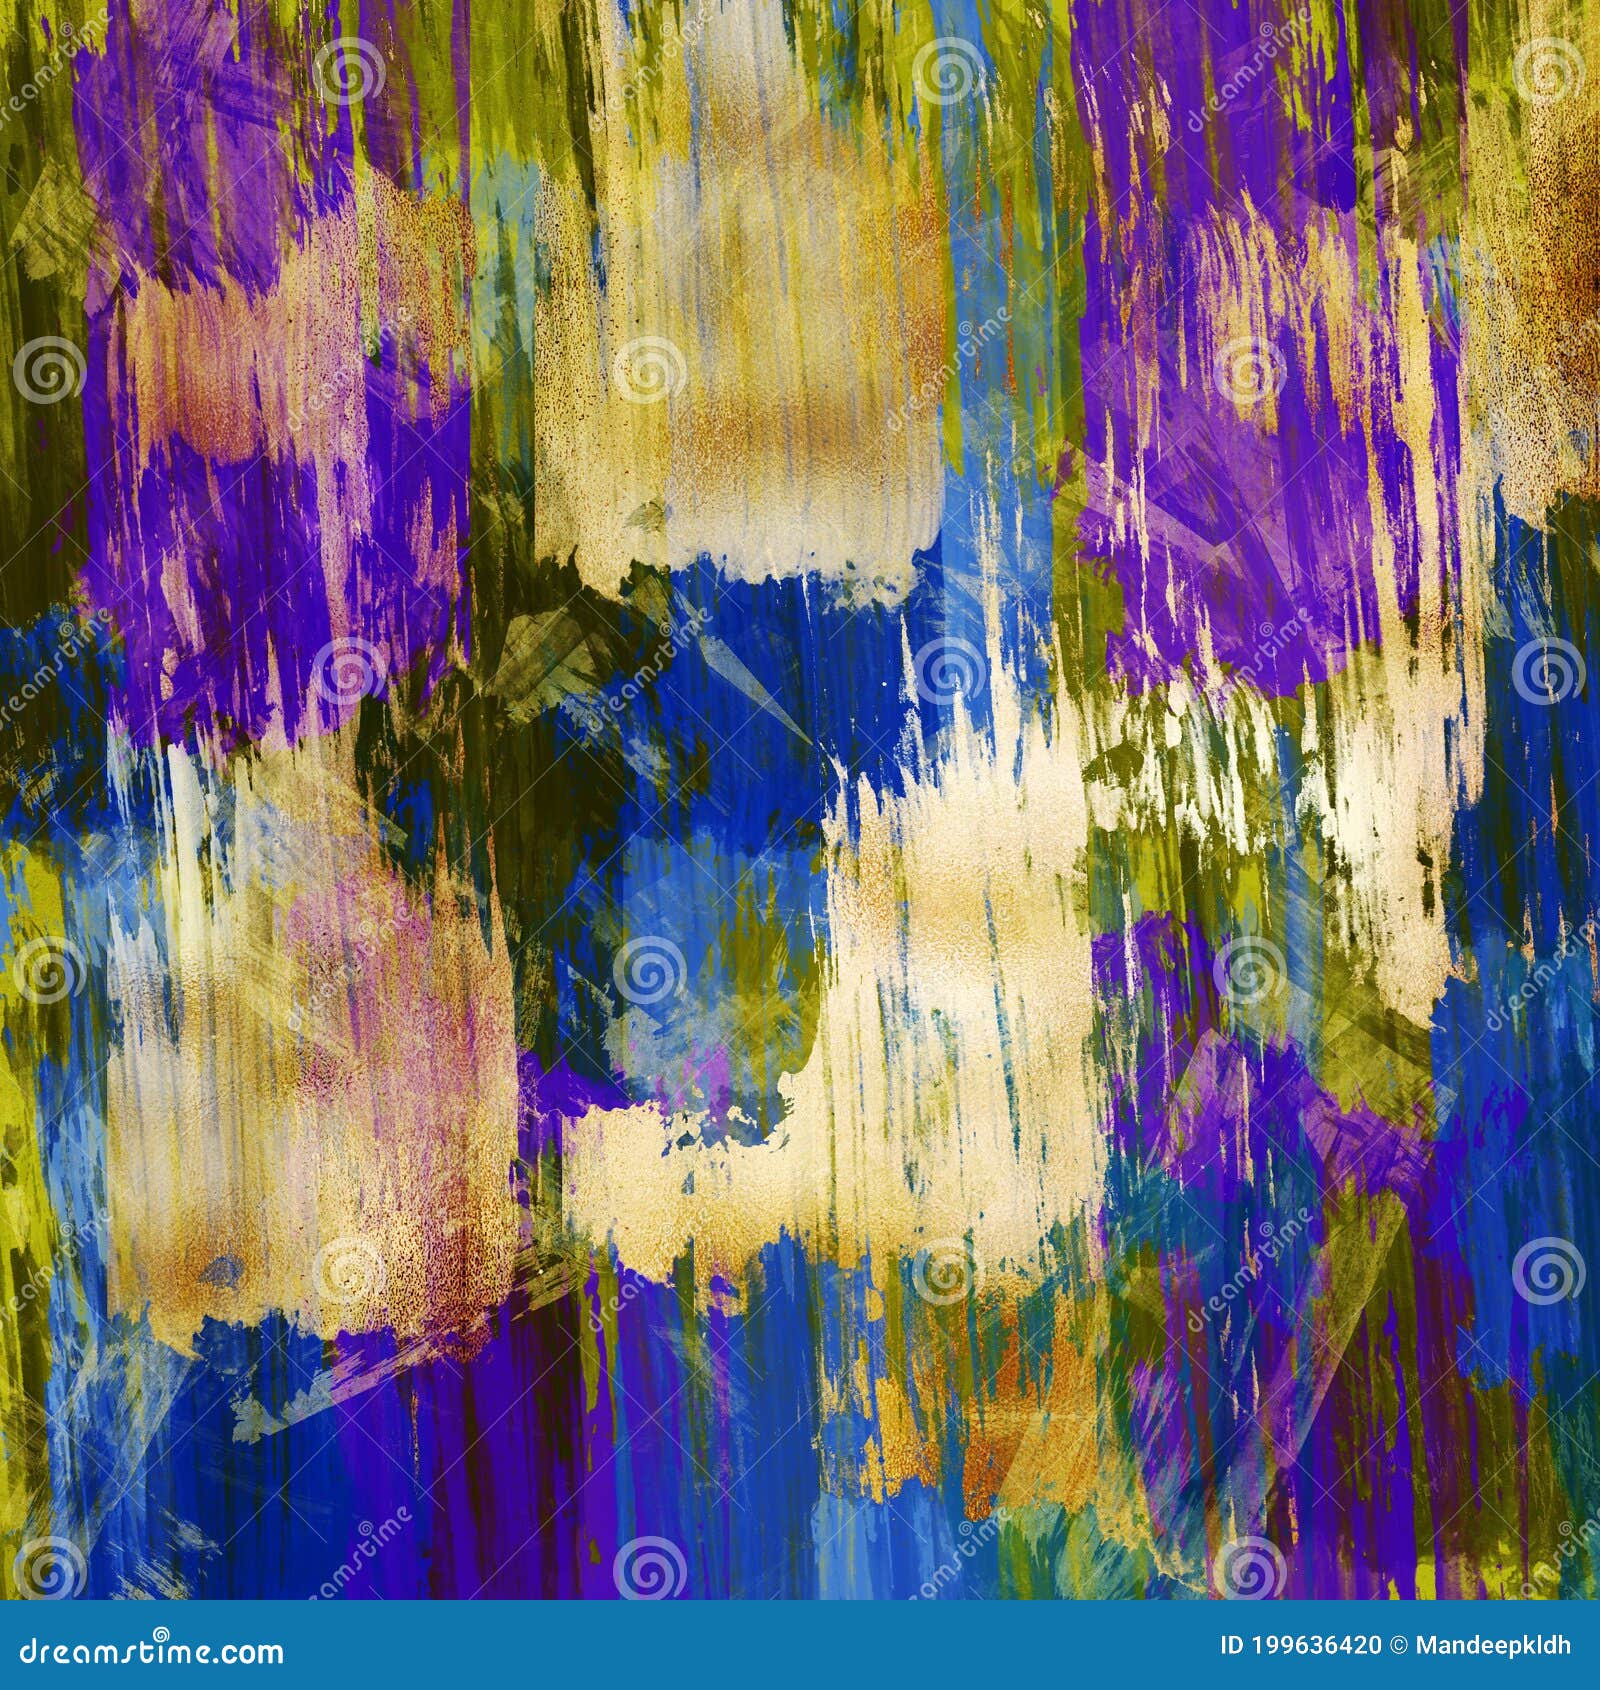 Purple, Blue And Gold Metallic Abstract Watercolor Art by Modern Art